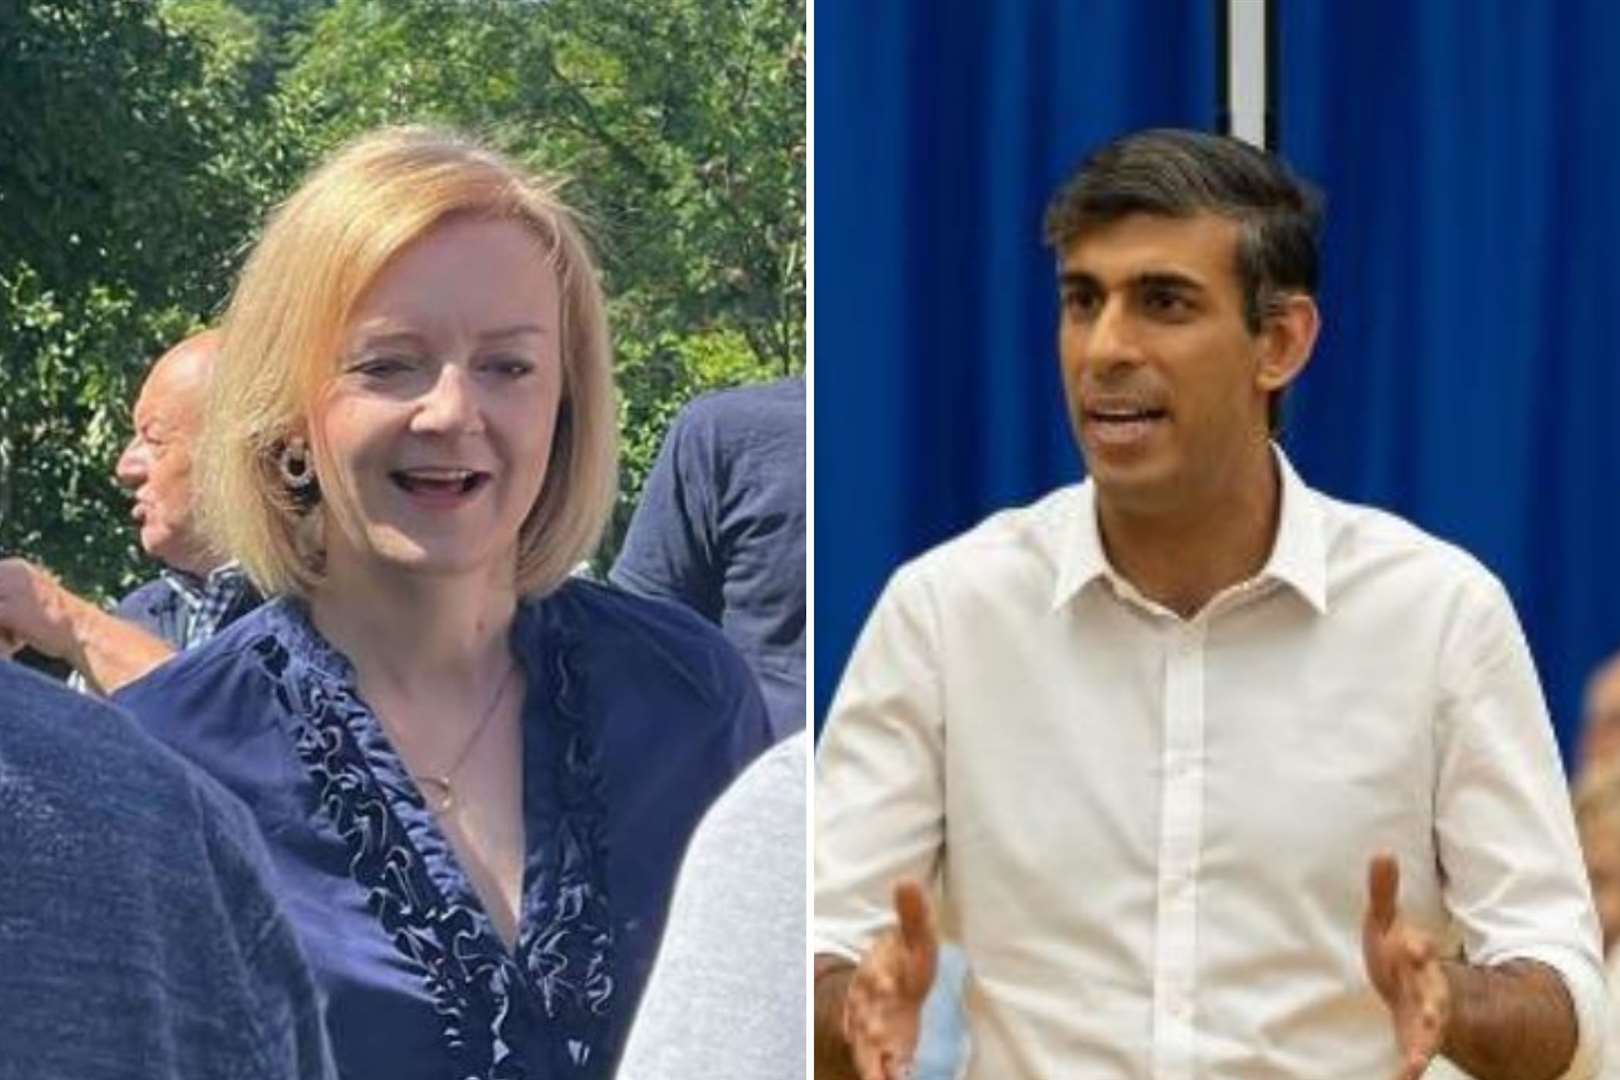 Conservative leadership candidates Liz Truss and Rishi Sunak have remained on the campaign trail this week